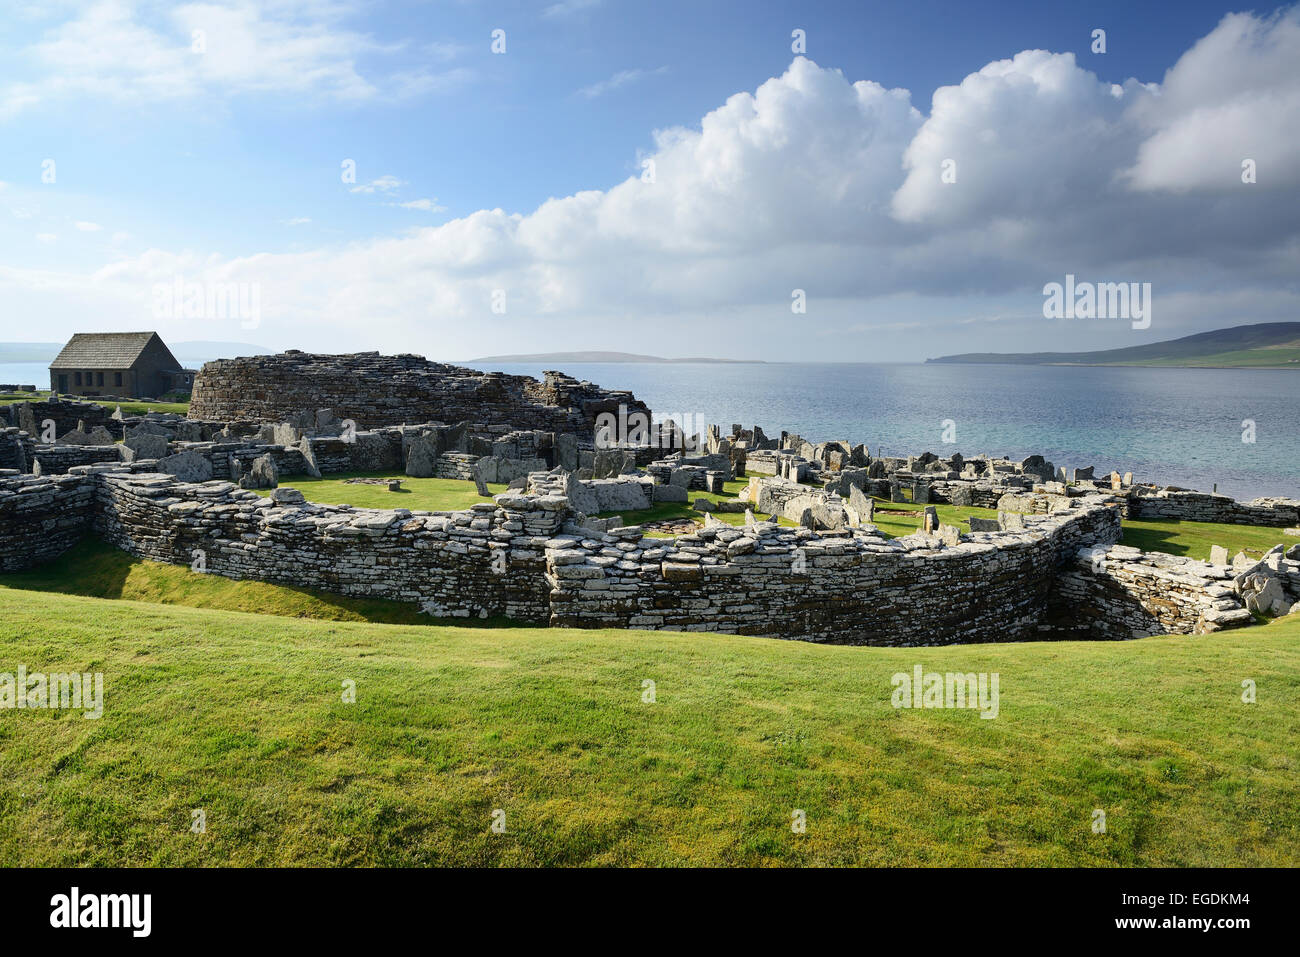 Neolithic settlement Broch of Gurness, Broch of Gurness, UNESCO World Heritage Site The Heart of Neolithic Orkney, Orkney Islands, Scotland, Great Britain, United Kingdom Stock Photo